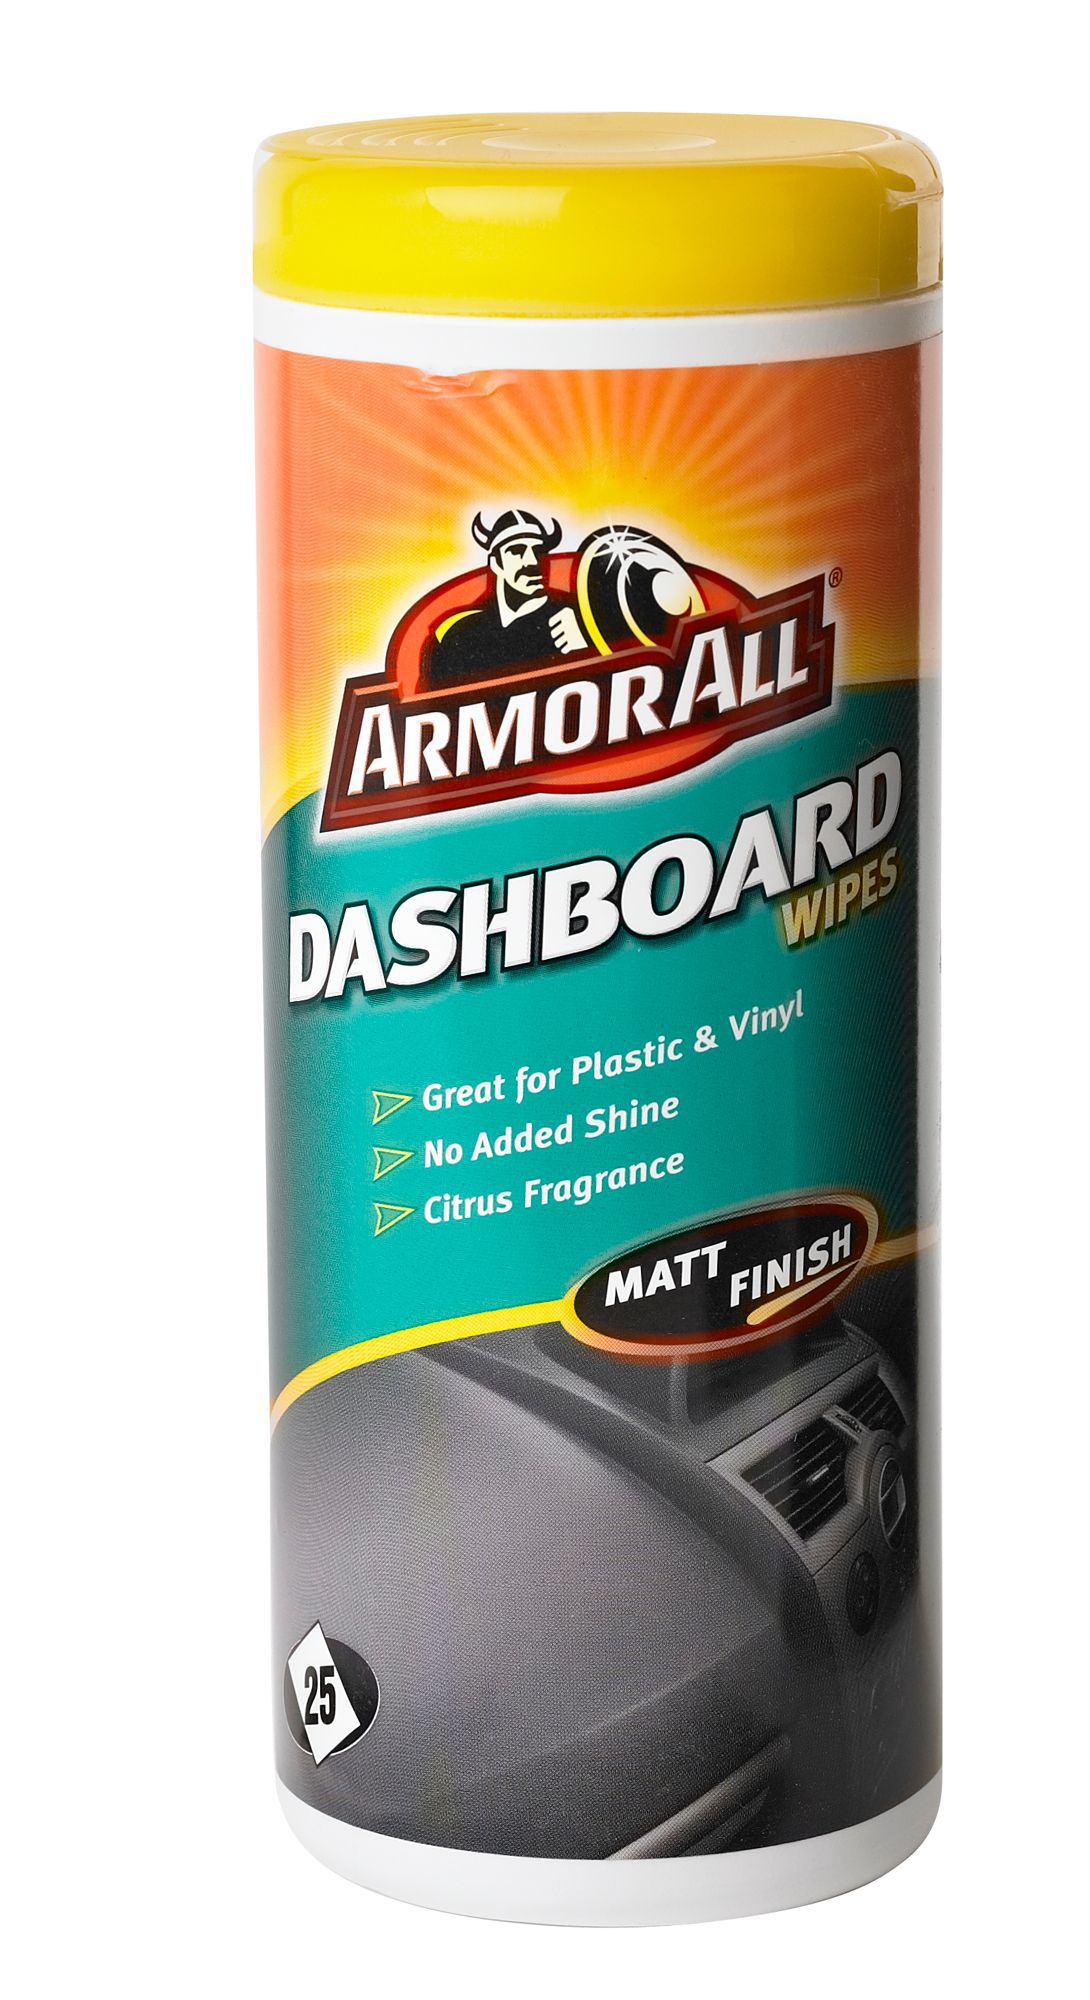 Armor All Dashboard wipe, Pack of 25